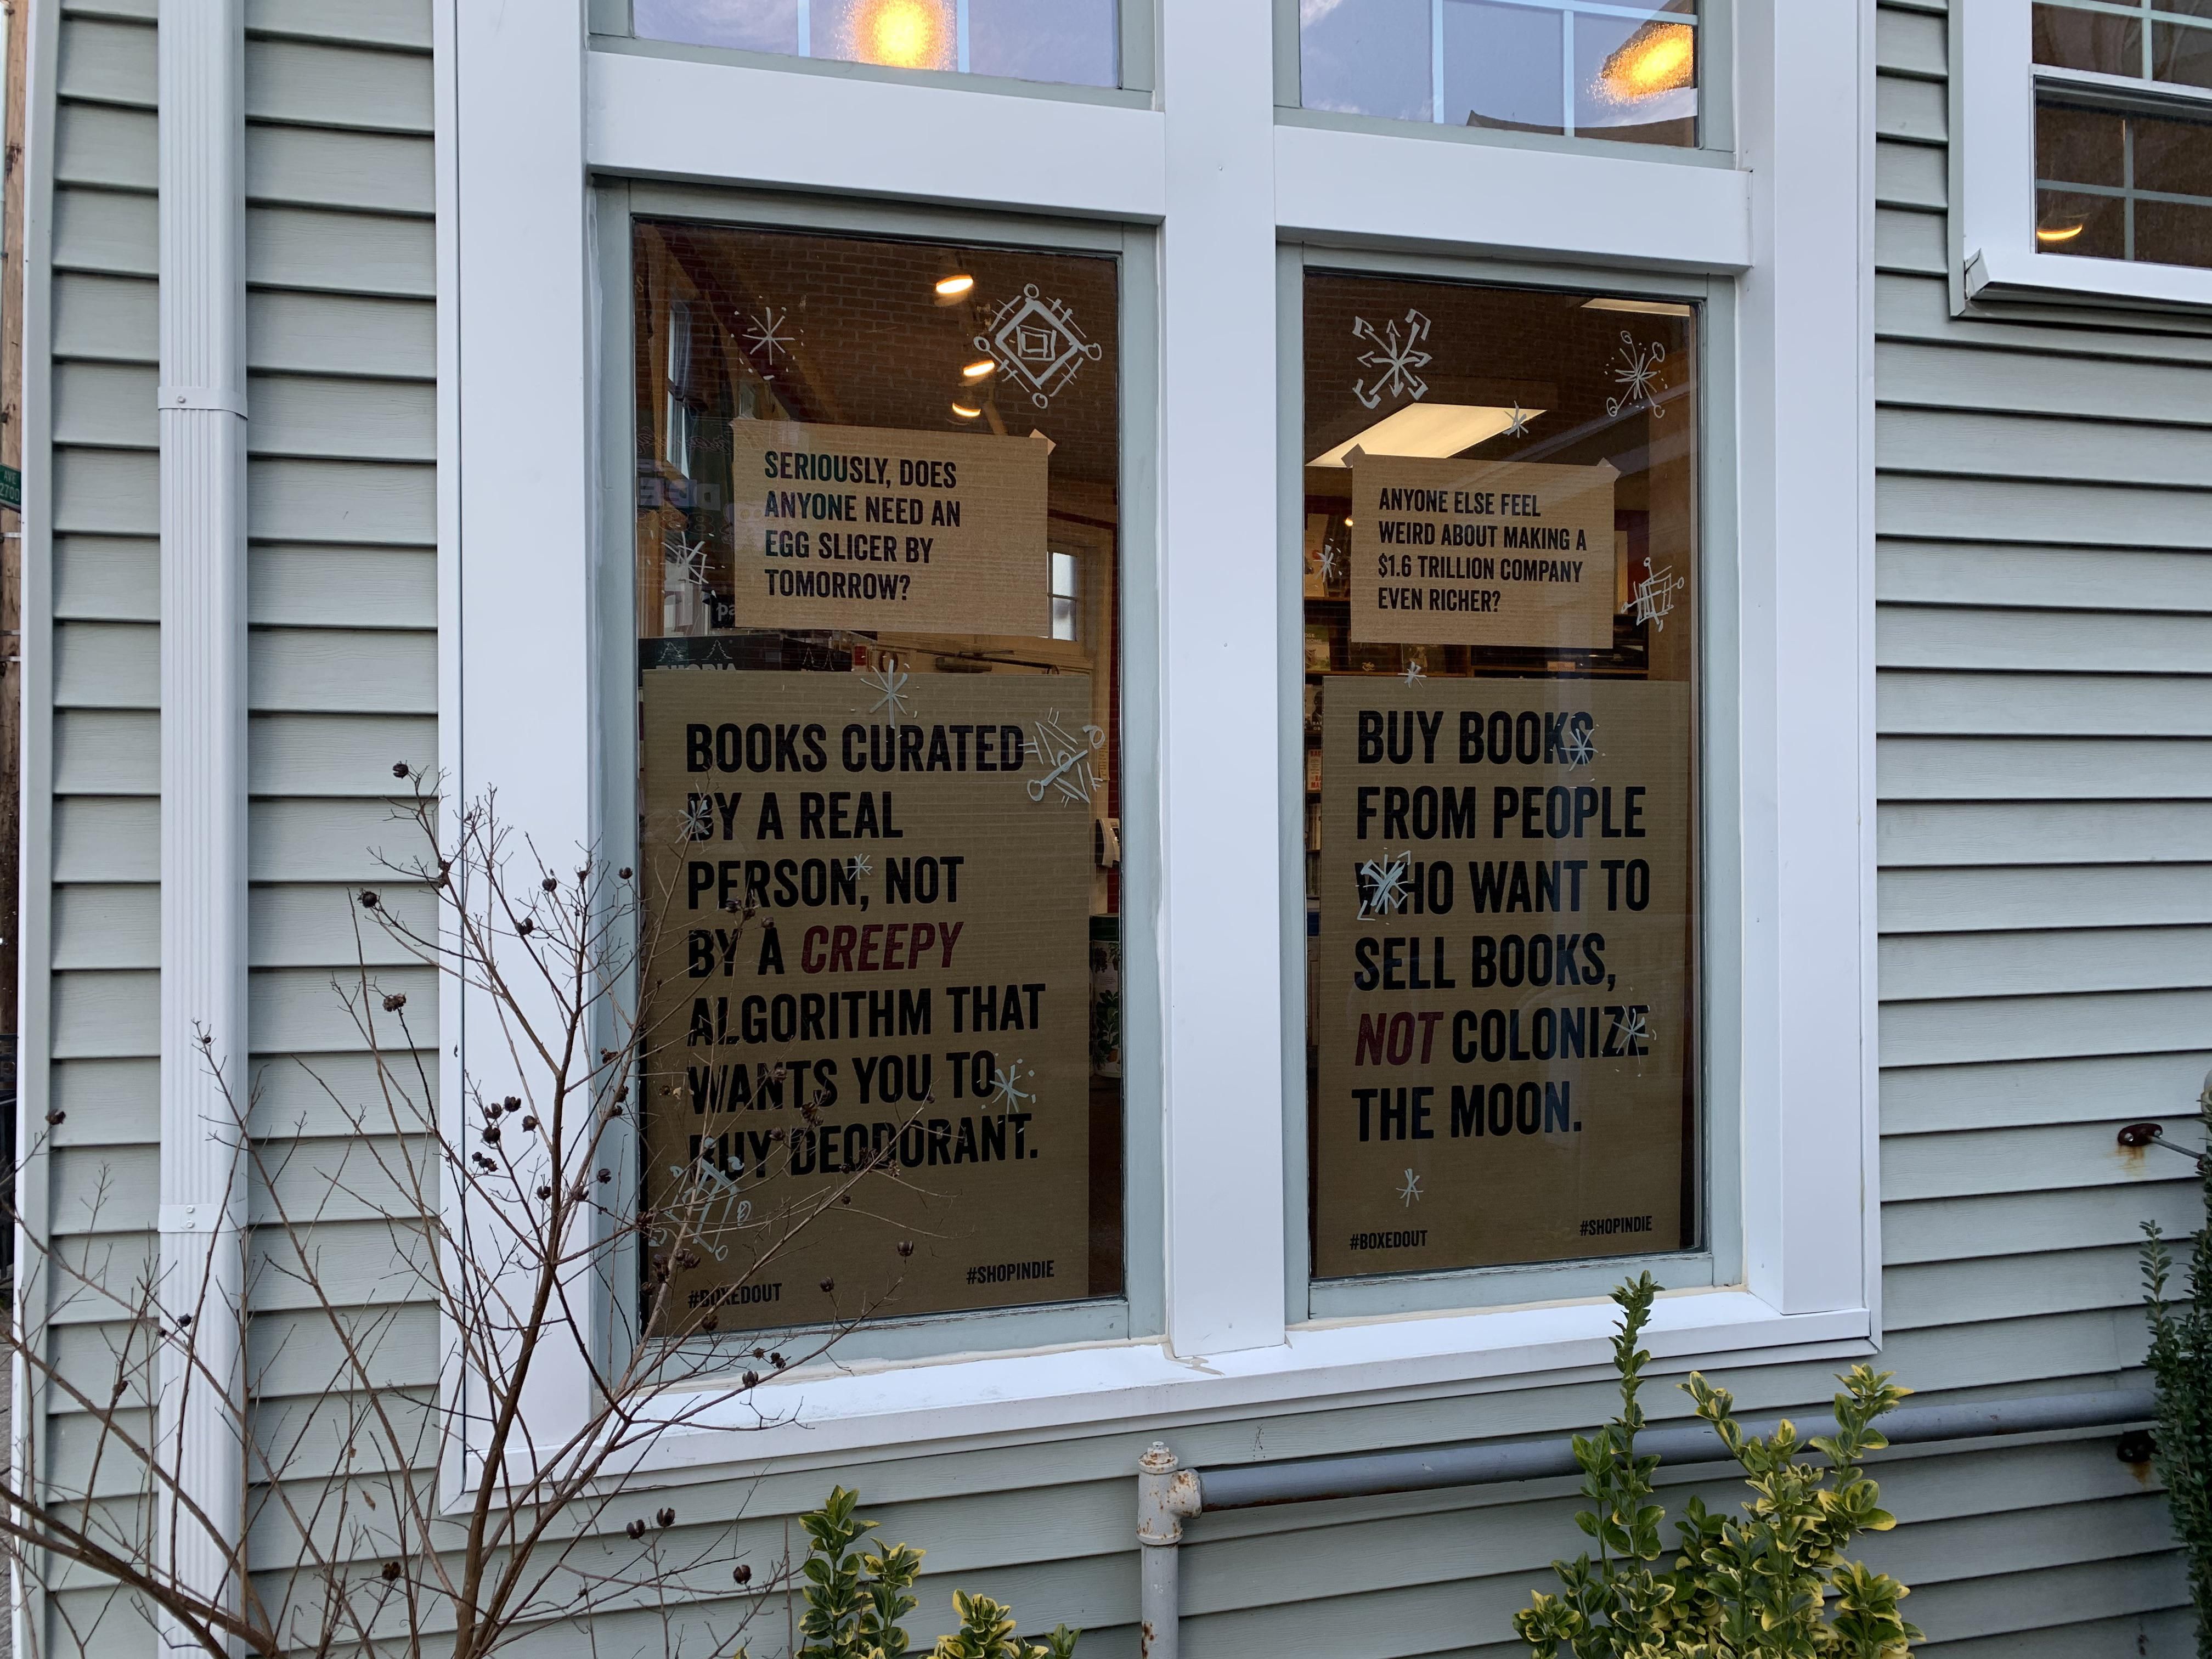 Seen in the windows of my local indie bookstore.